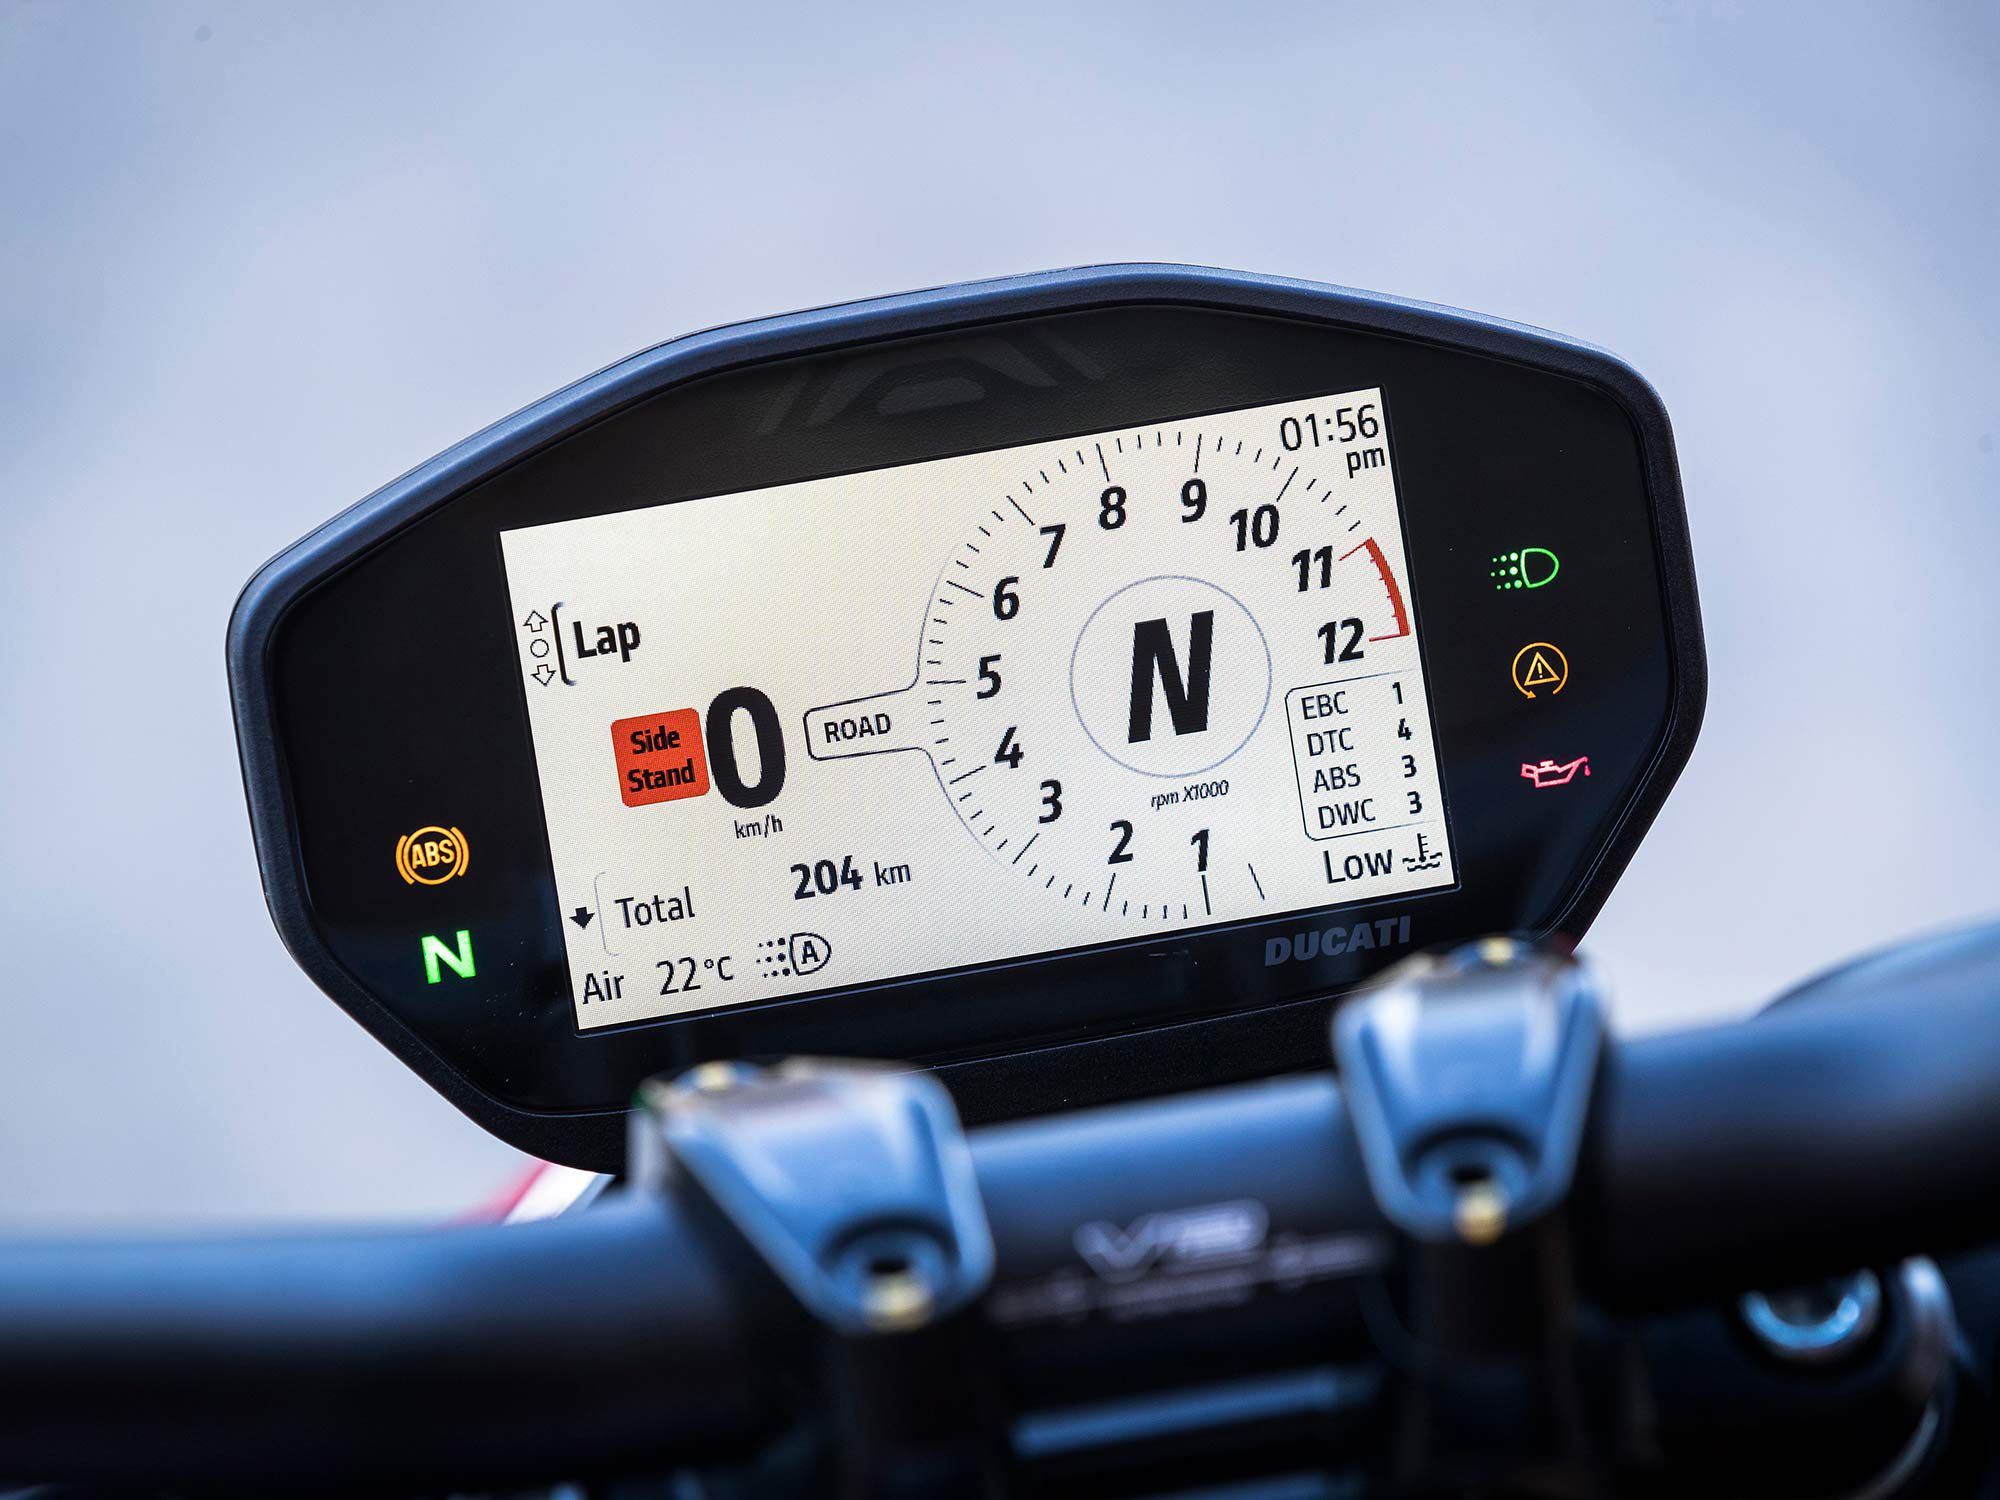 The Streetfighter V2 is dripping with race-inspired electronics; a six-axis IMU manages all the electronic controls of the bike. Modes can be individually customized to rider preferences via the Streetfighter V2′s 4.3-inch TFT display.